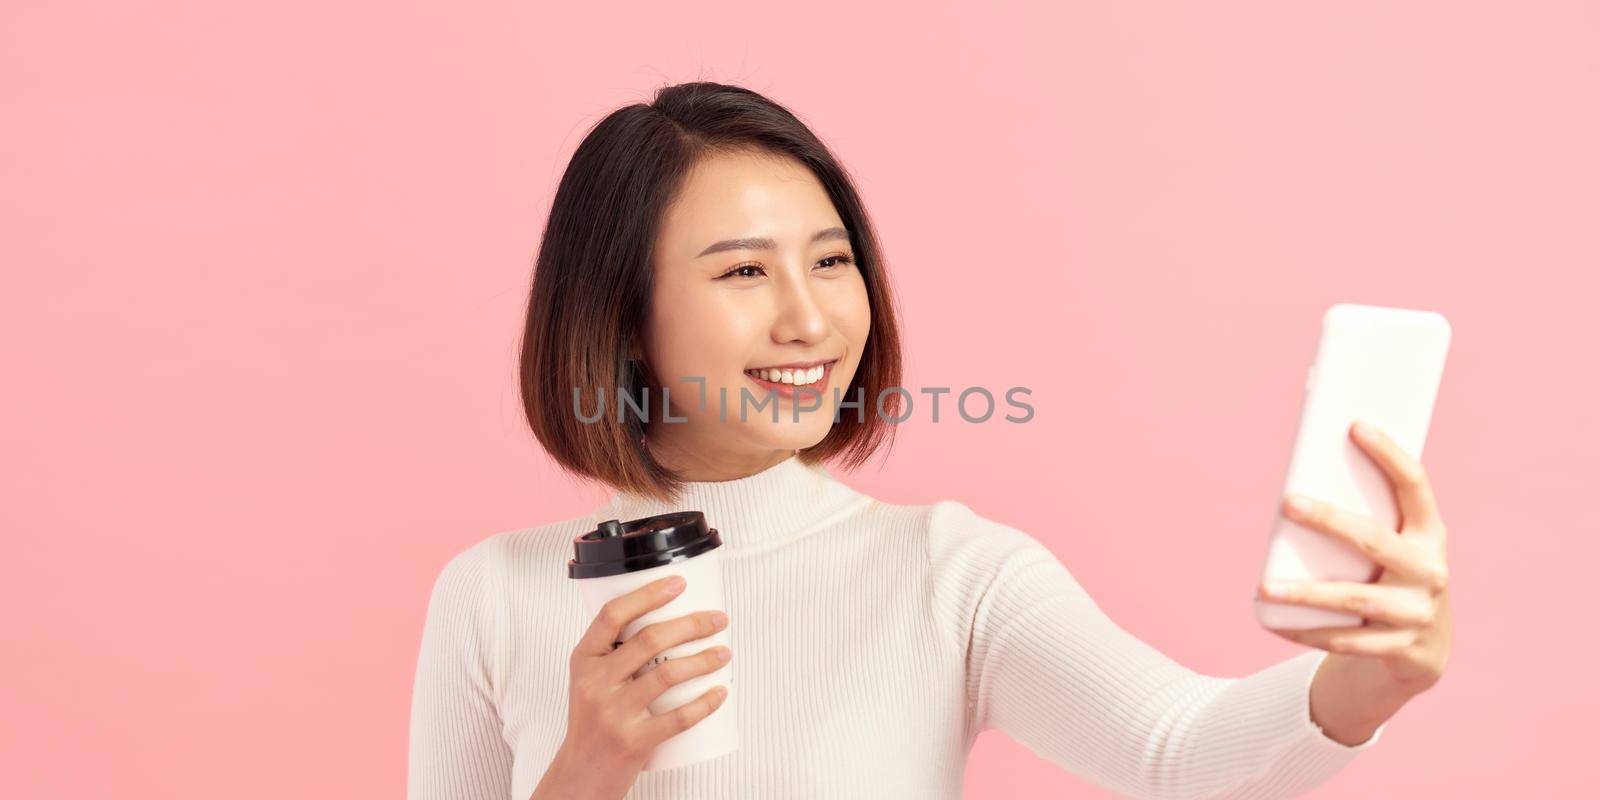 Portrait of a smiling attractive woman taking a selfie while holding take away coffee cup over pink background by makidotvn